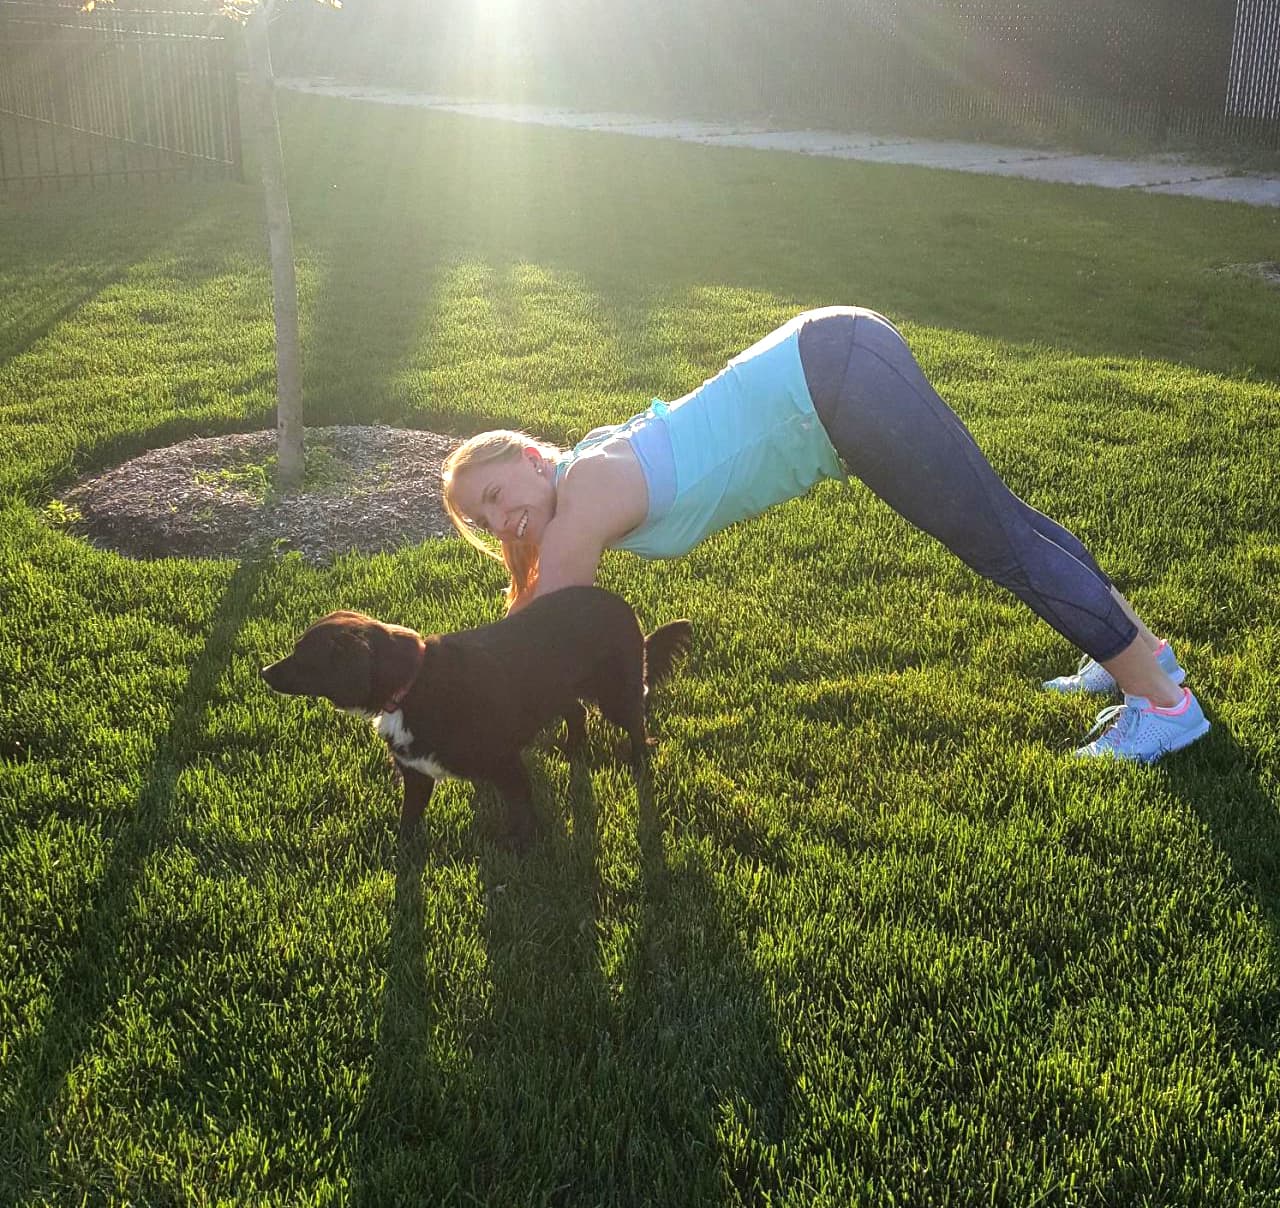 Rachel Monroe takes a gentler approach to exercise these days, like taking walks or doing yoga with her dog Rosie. (Courtesy Rachel Monroe)